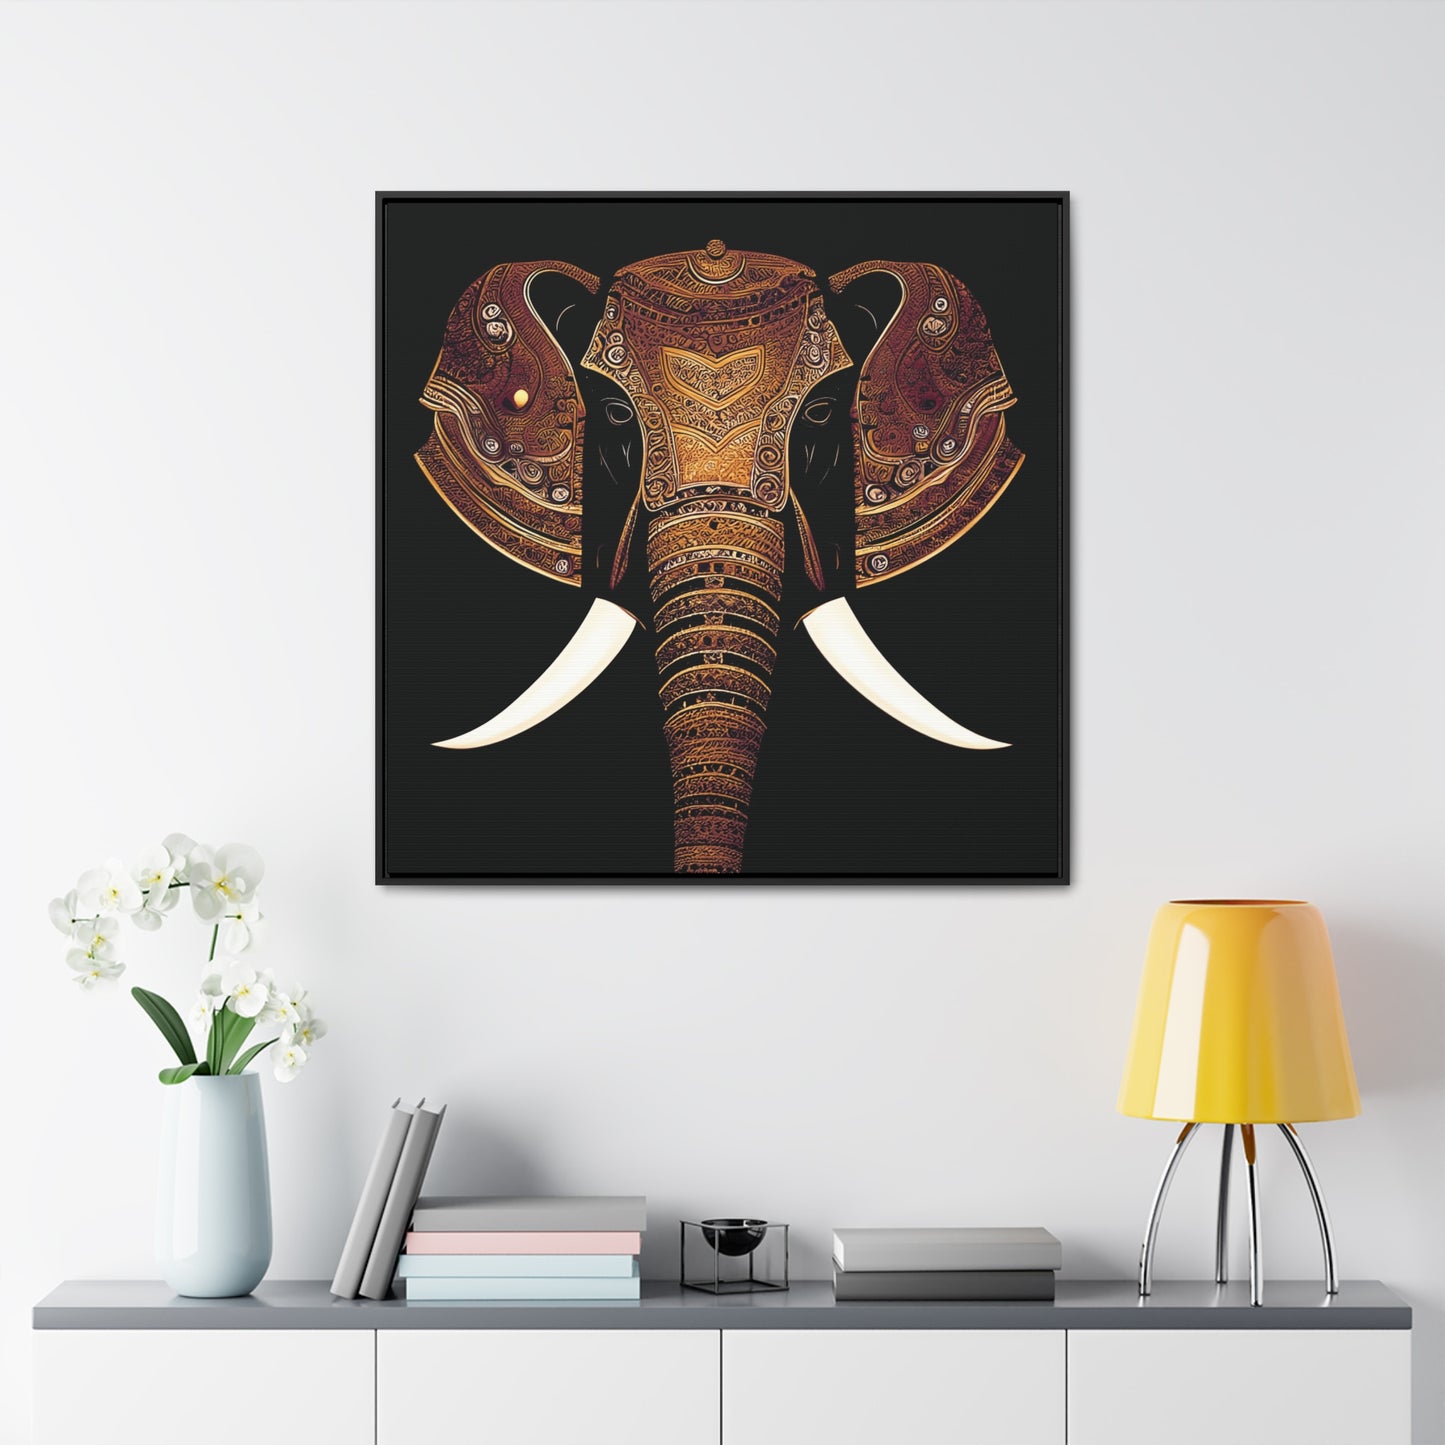 Indian Elephant Head With Parade Colors on Black Background Print on Canvas in a Floating Frame 36x36